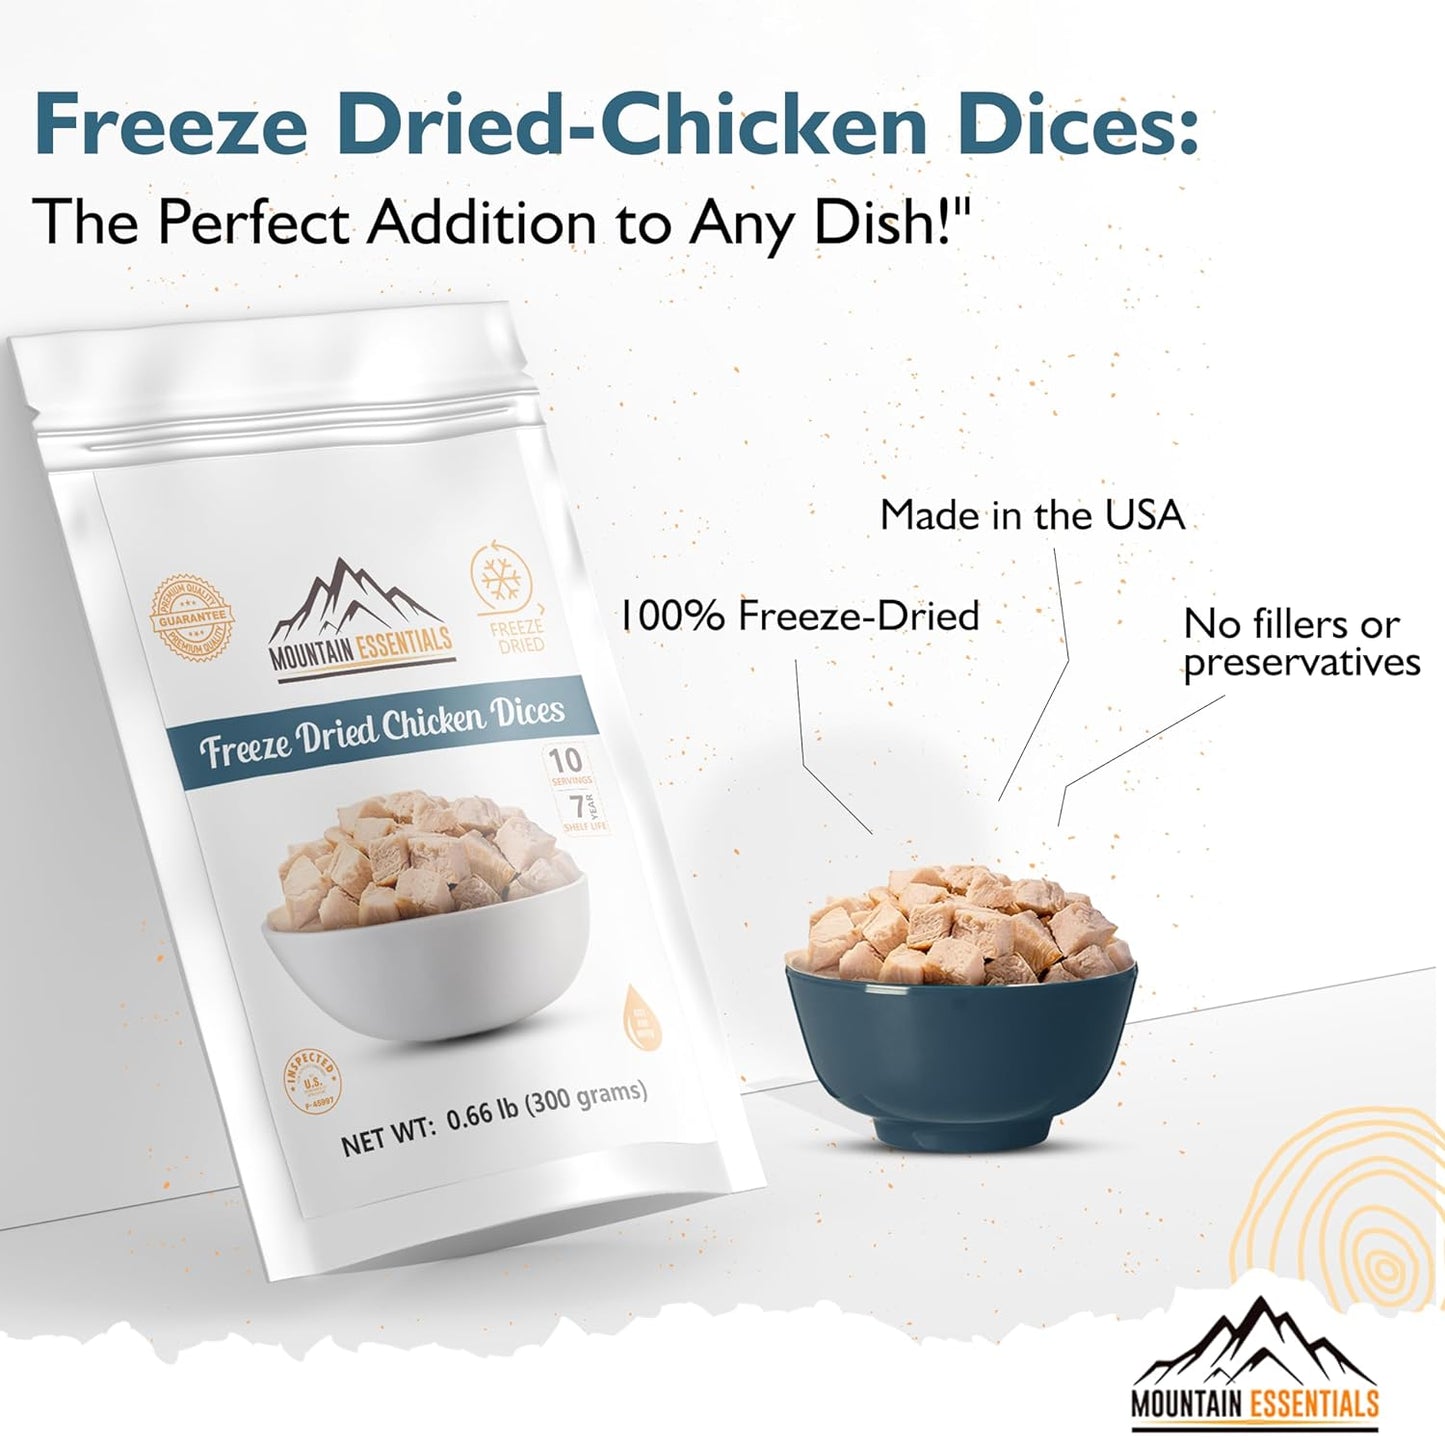 Mountain Essentials Freeze Dried Chicken Dices Resealable Pouch - 300 grams